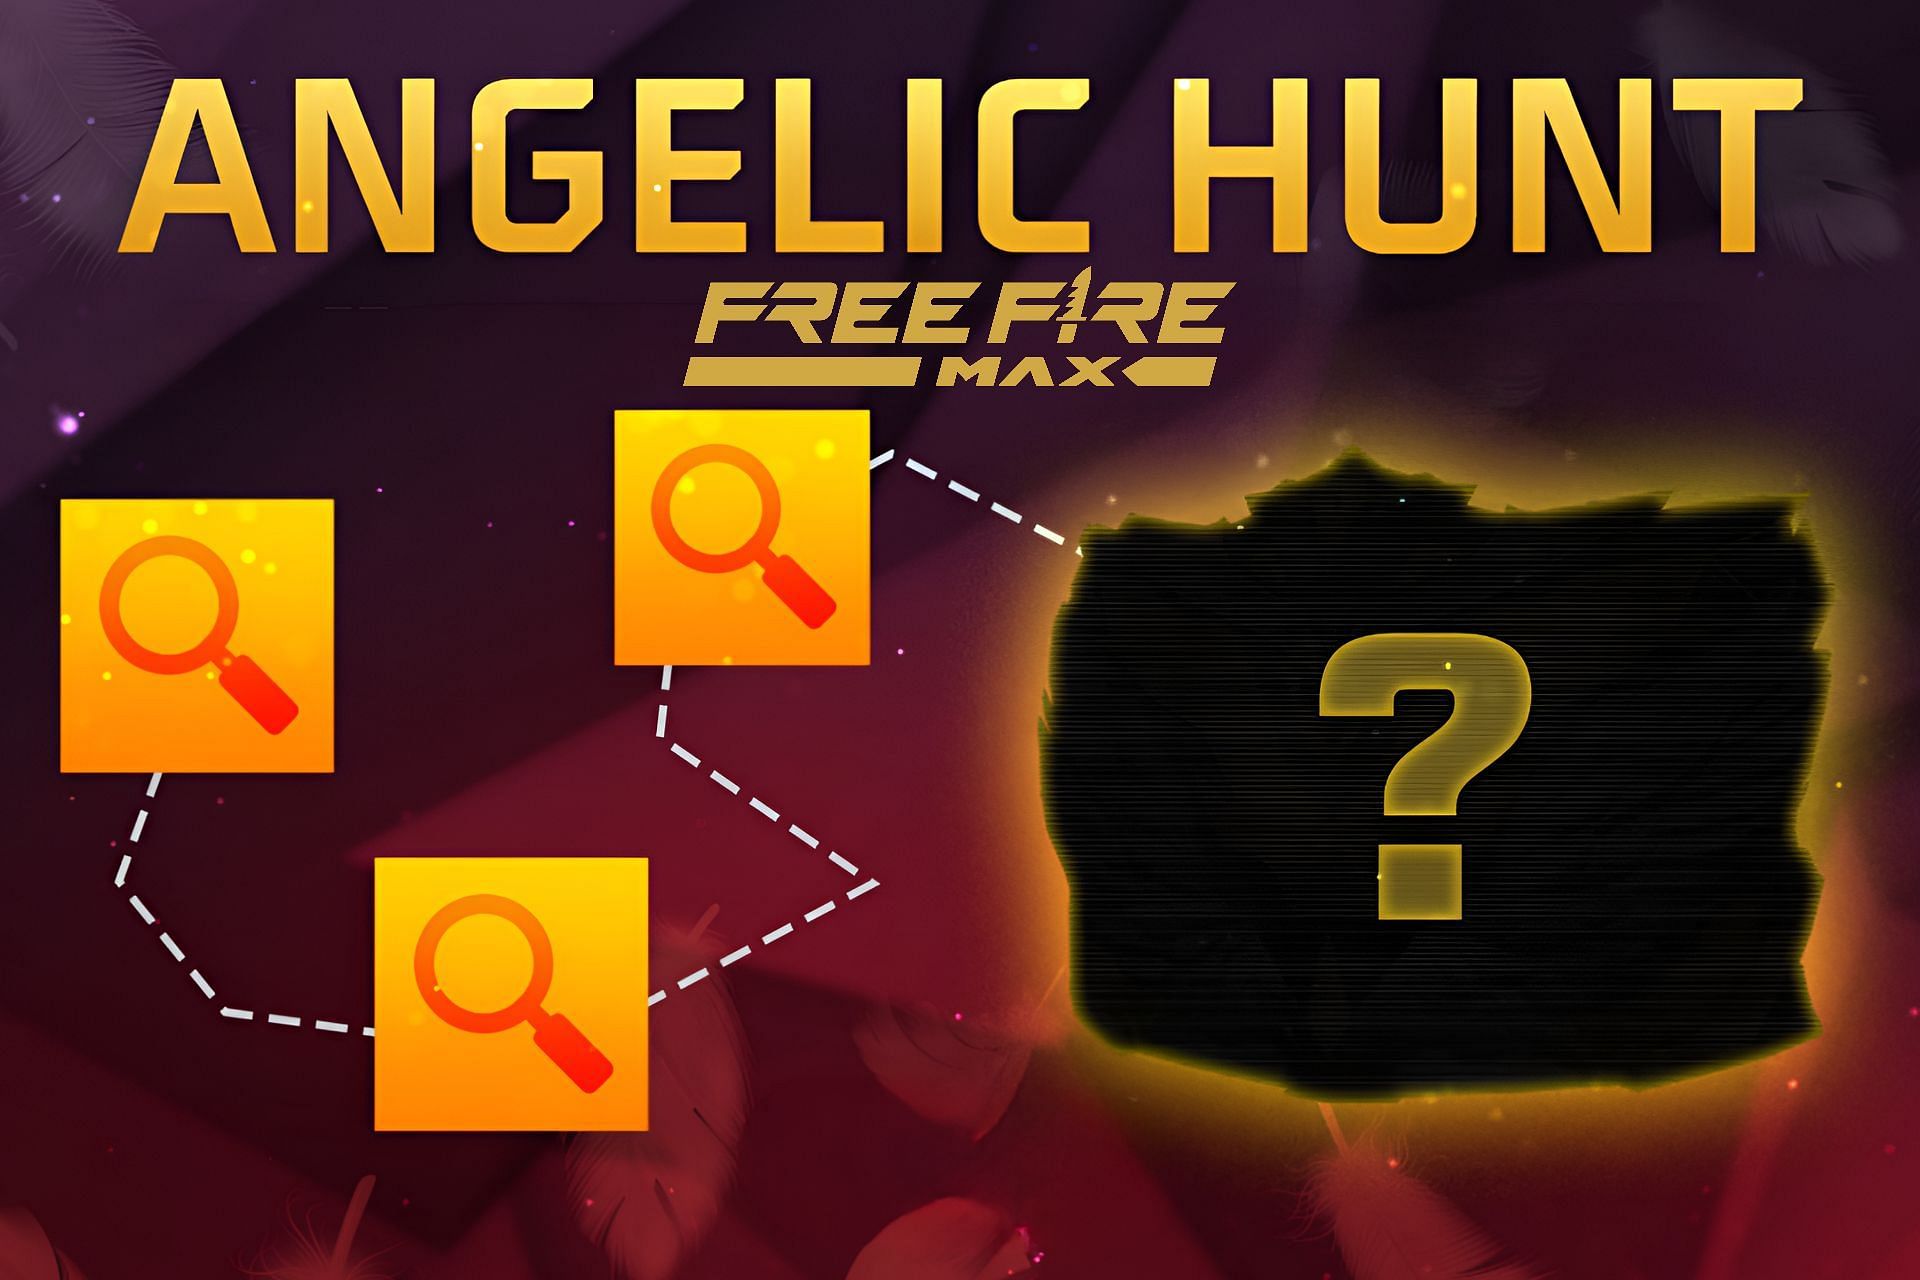 Angelic Hunt event in Free Fire and Free Fire MAX (Image via Garena)